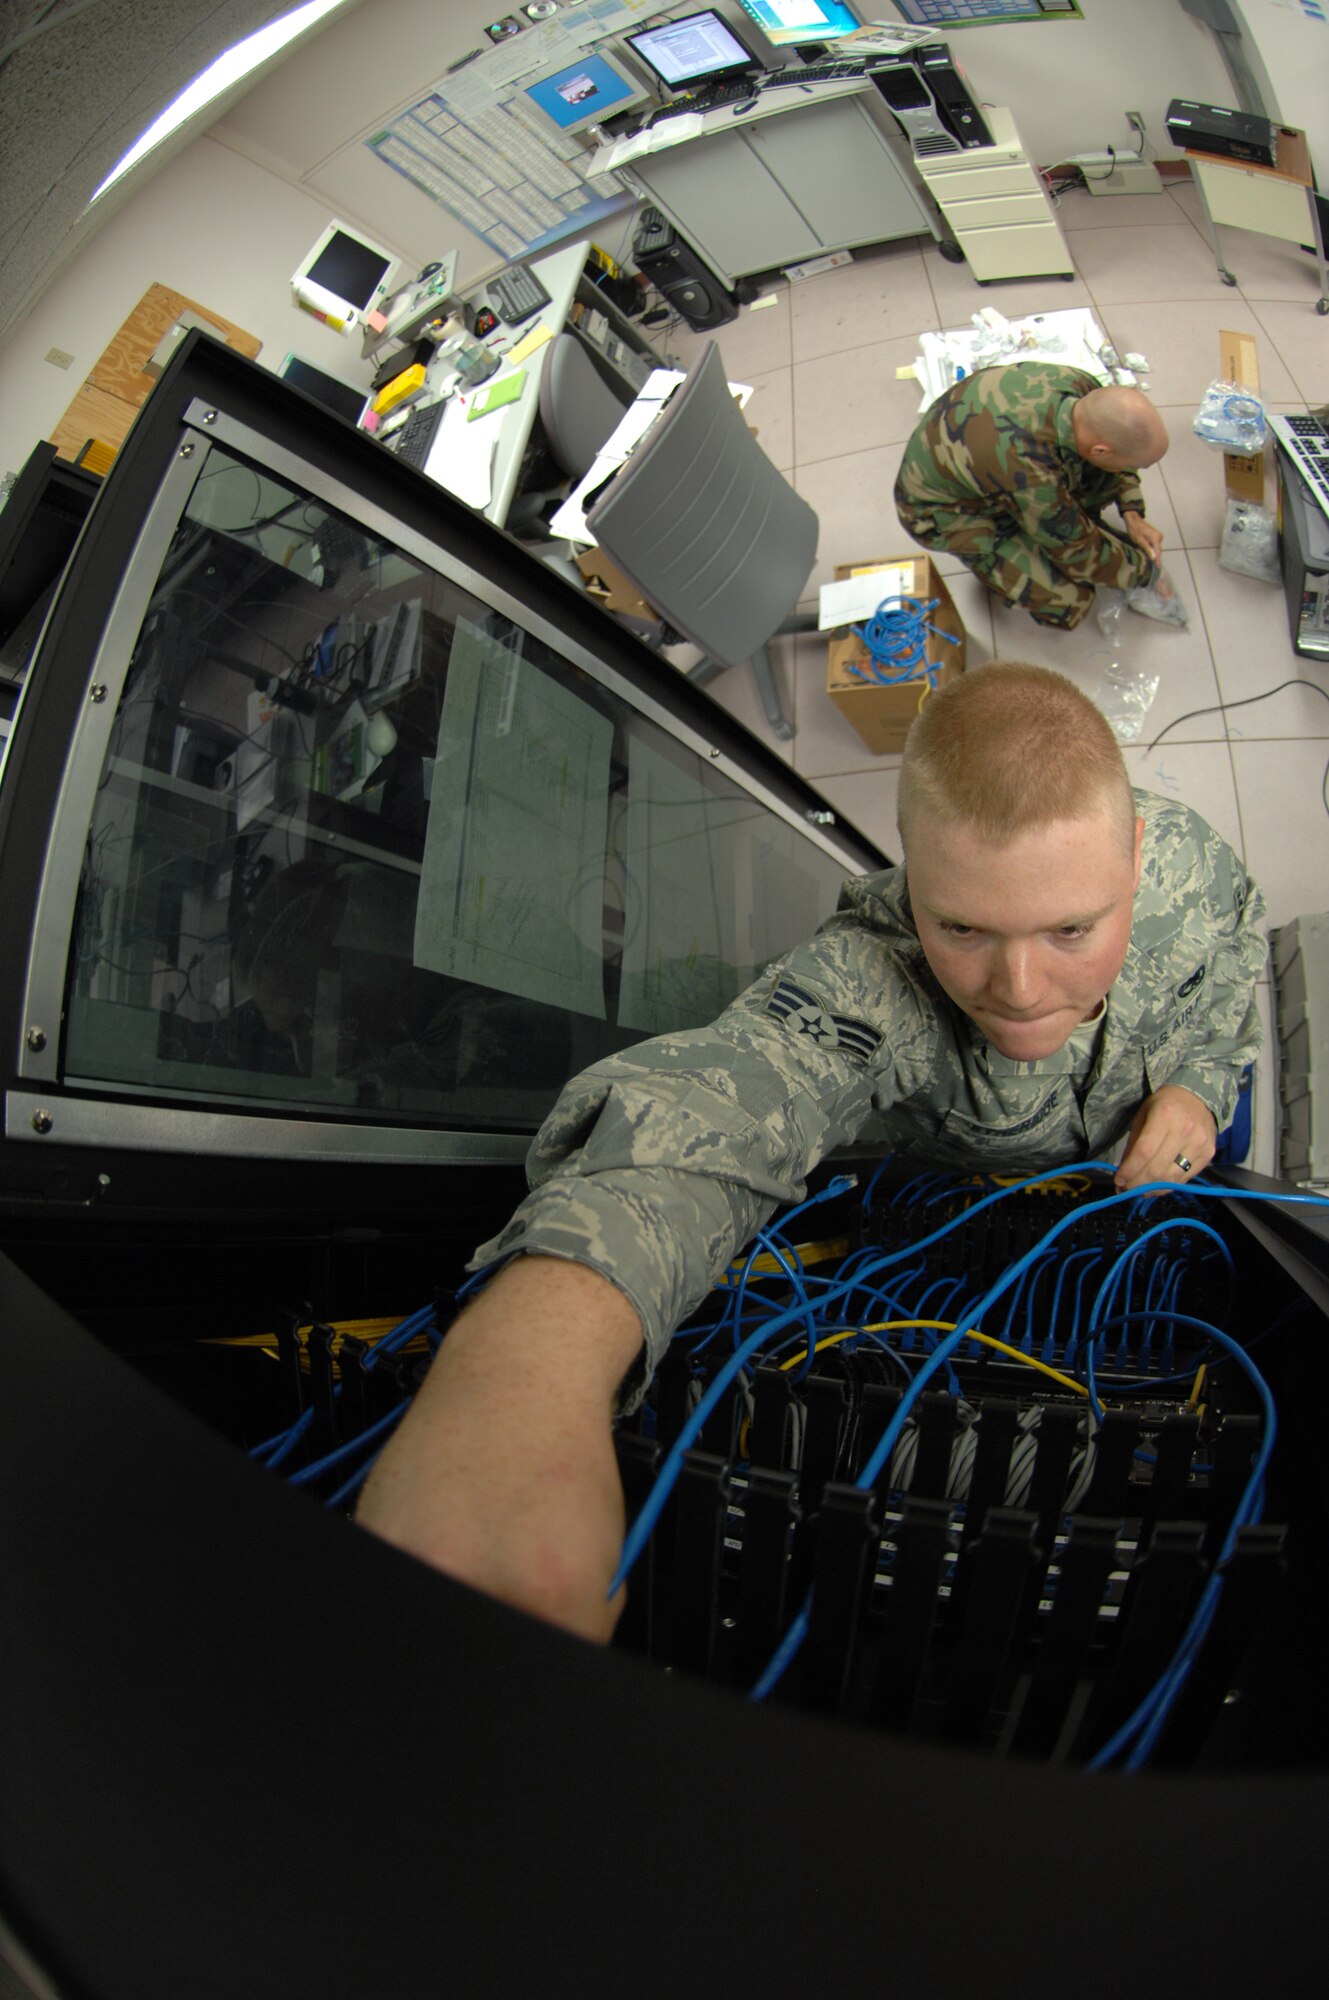 Senior Airman Etheridge, traces and plugs Cat-5 cable to the existing patch panel at Holloman Air Force Base, N.M. May 05. SrA Etheridge is an infrastructure technician assigned to the 49th Communications Squadron.
(U.S. Air Force photo/ Senior Airman Anthony Nelson Jr)  
